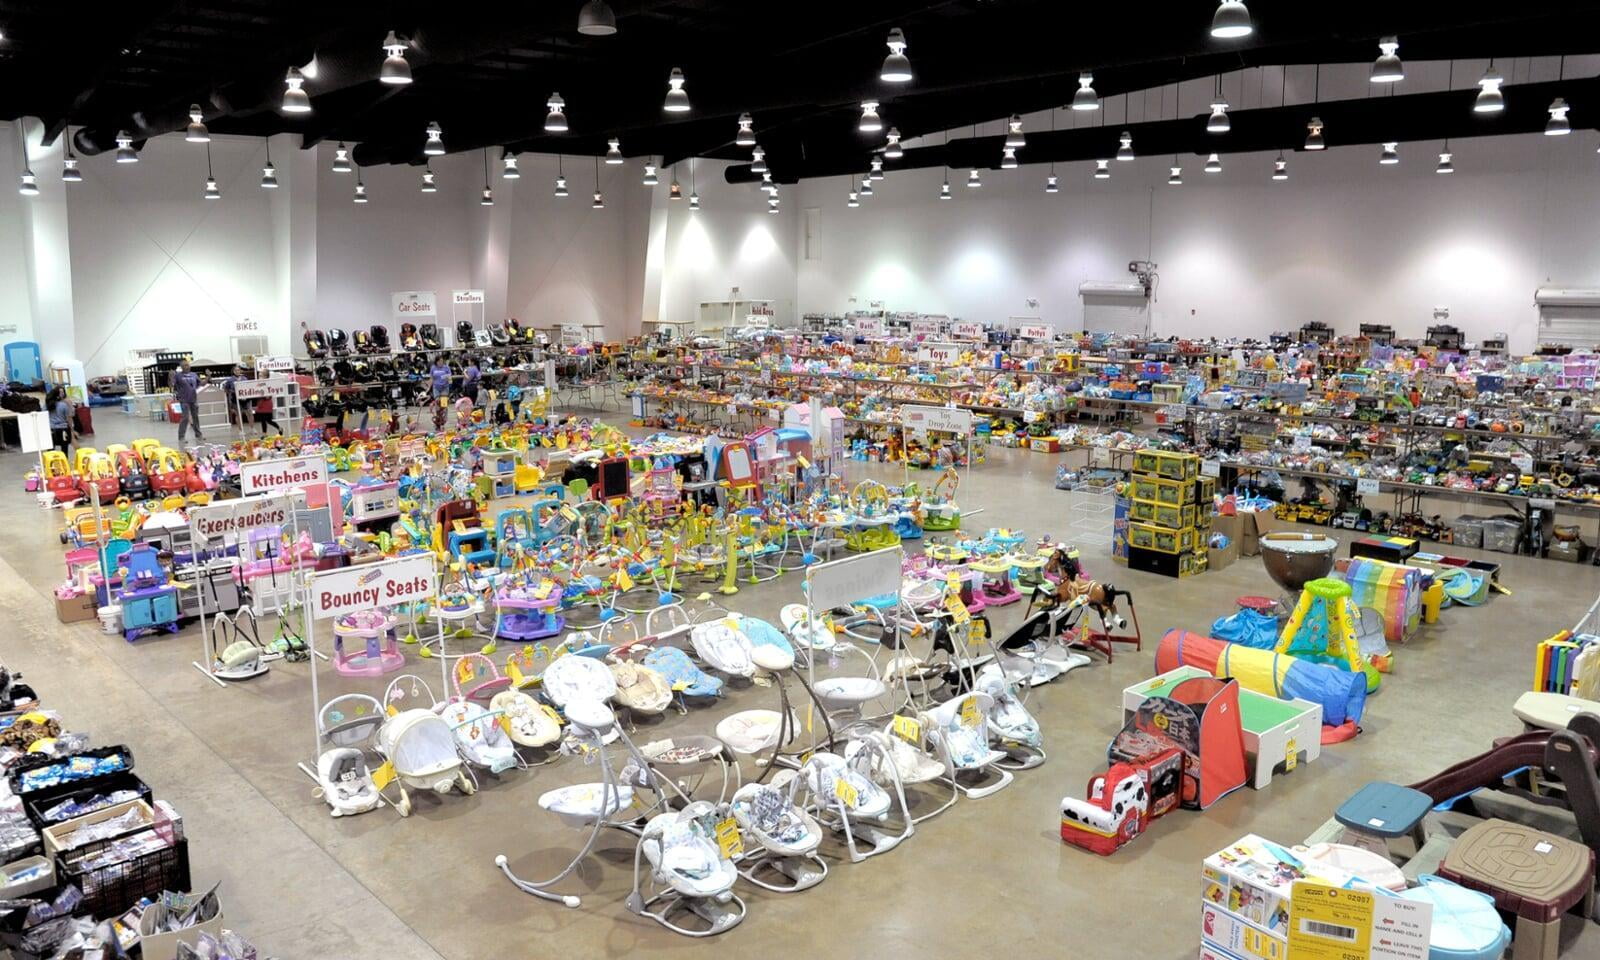 Overview of the sale showing bouncy seats and other merchandise presented.